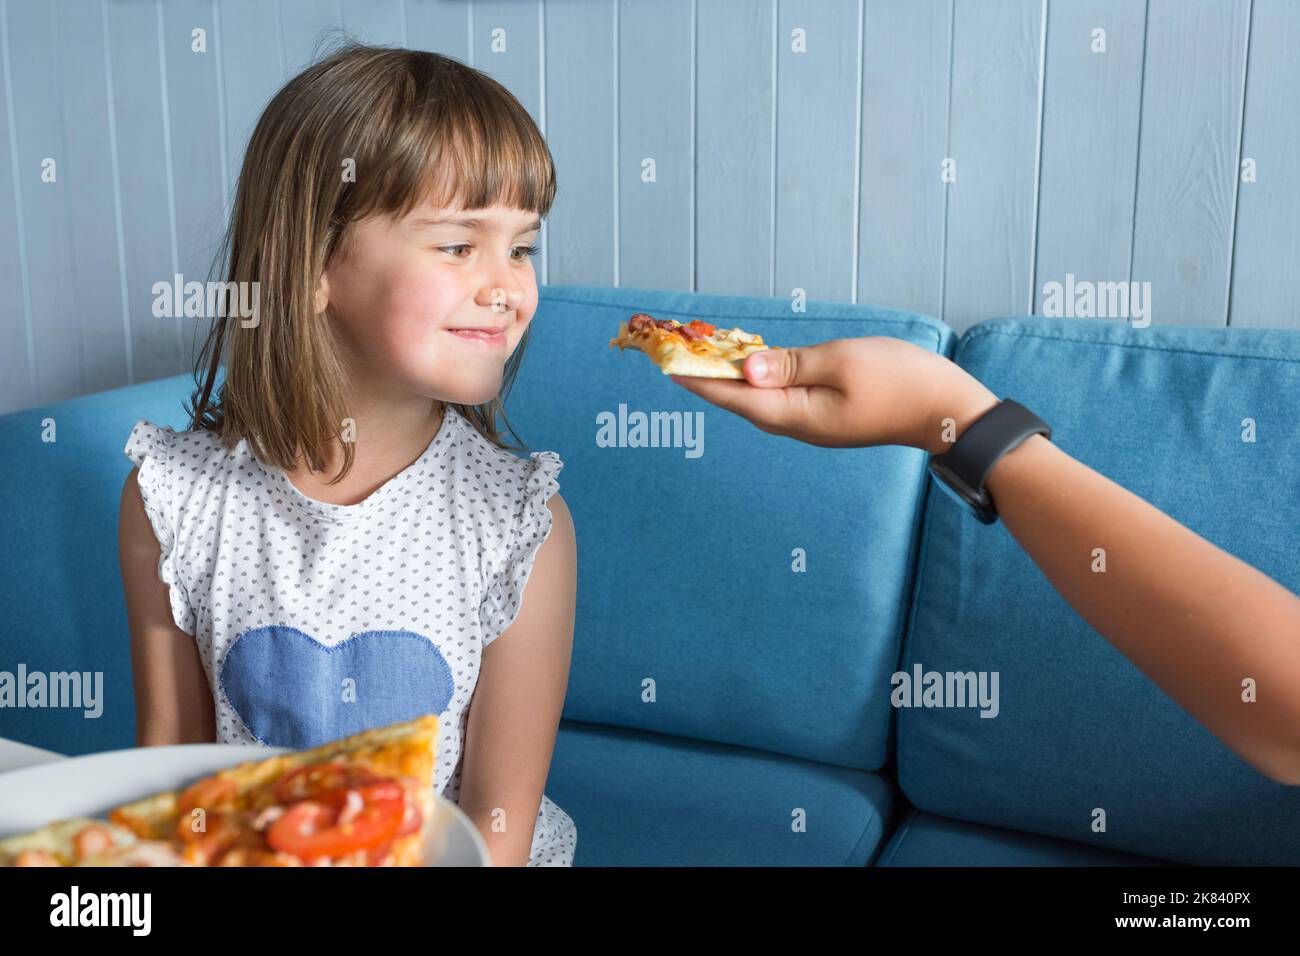 Little beautiful girl looking at a slice of pizza Stock Photo